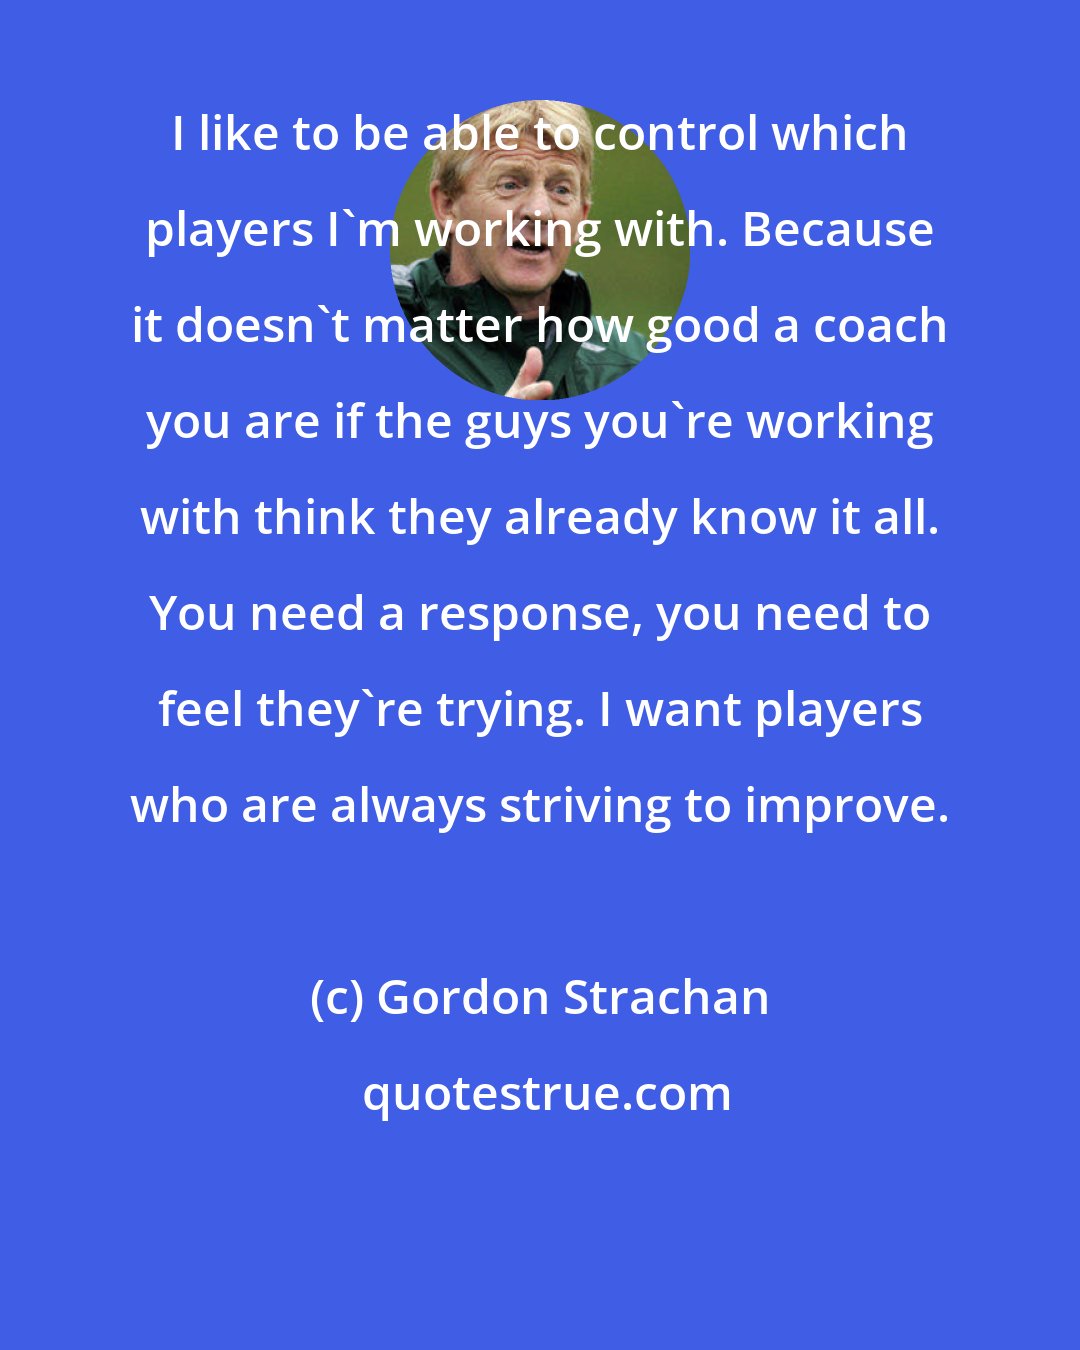 Gordon Strachan: I like to be able to control which players I'm working with. Because it doesn't matter how good a coach you are if the guys you're working with think they already know it all. You need a response, you need to feel they're trying. I want players who are always striving to improve.